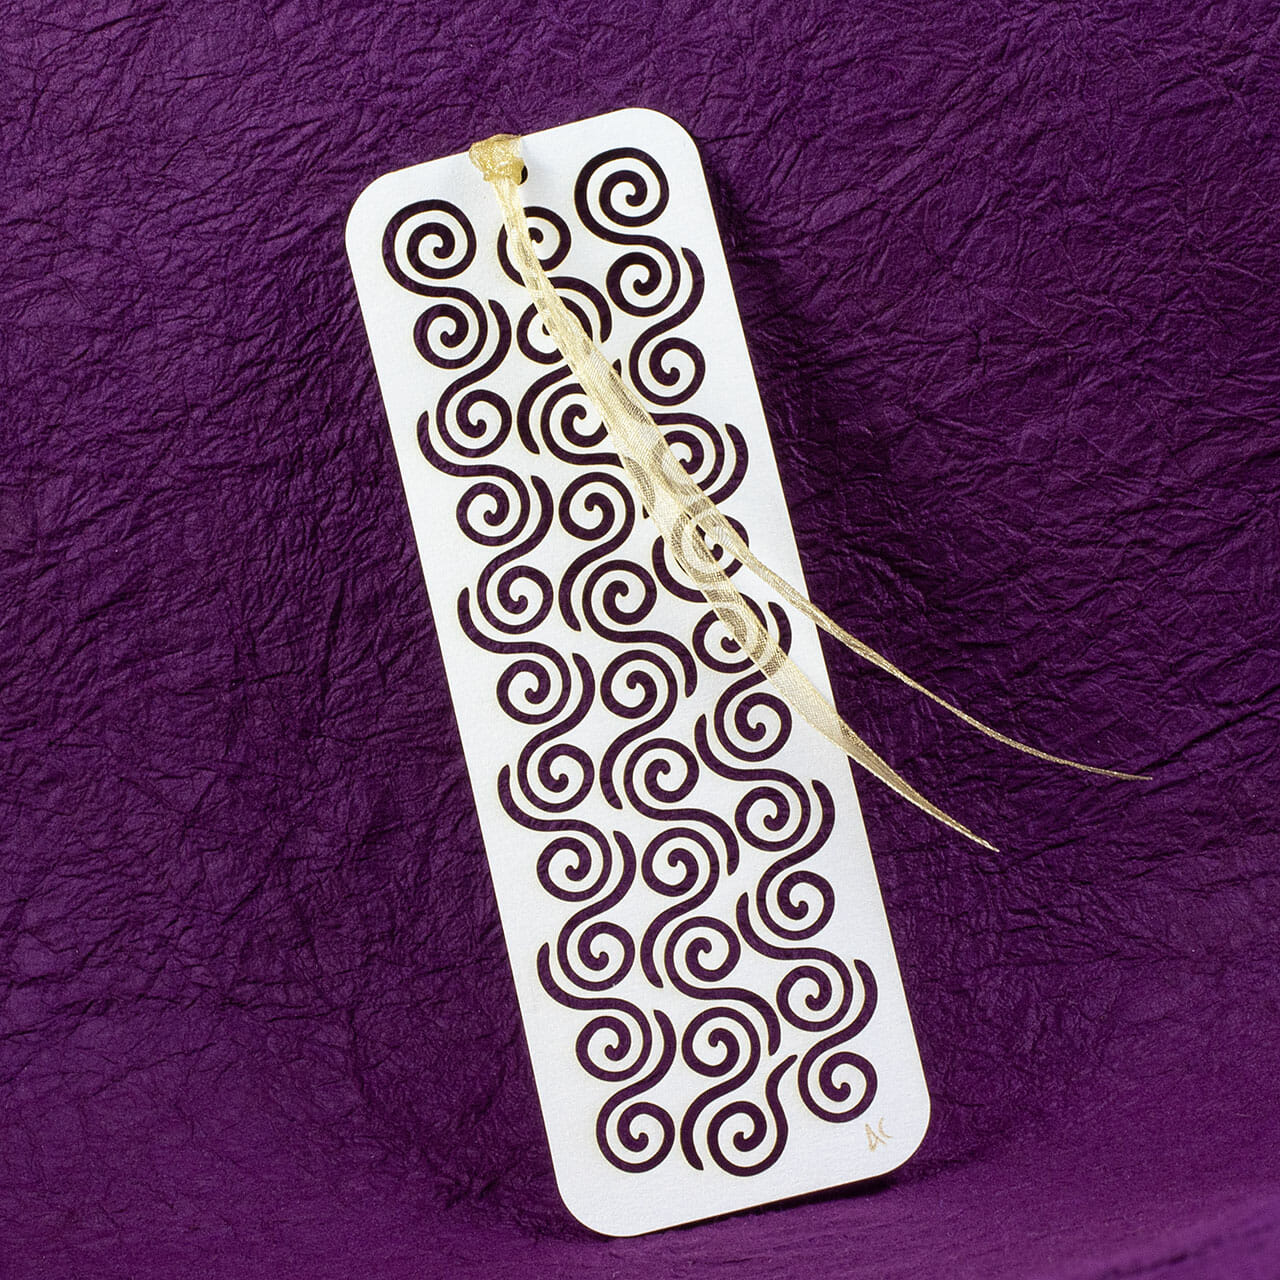 Kirigrami bookmark with an interlocking pattern of organic Celtic spirals cut from a white pearlescent stock with a gold gauze ribbon tied to one end.